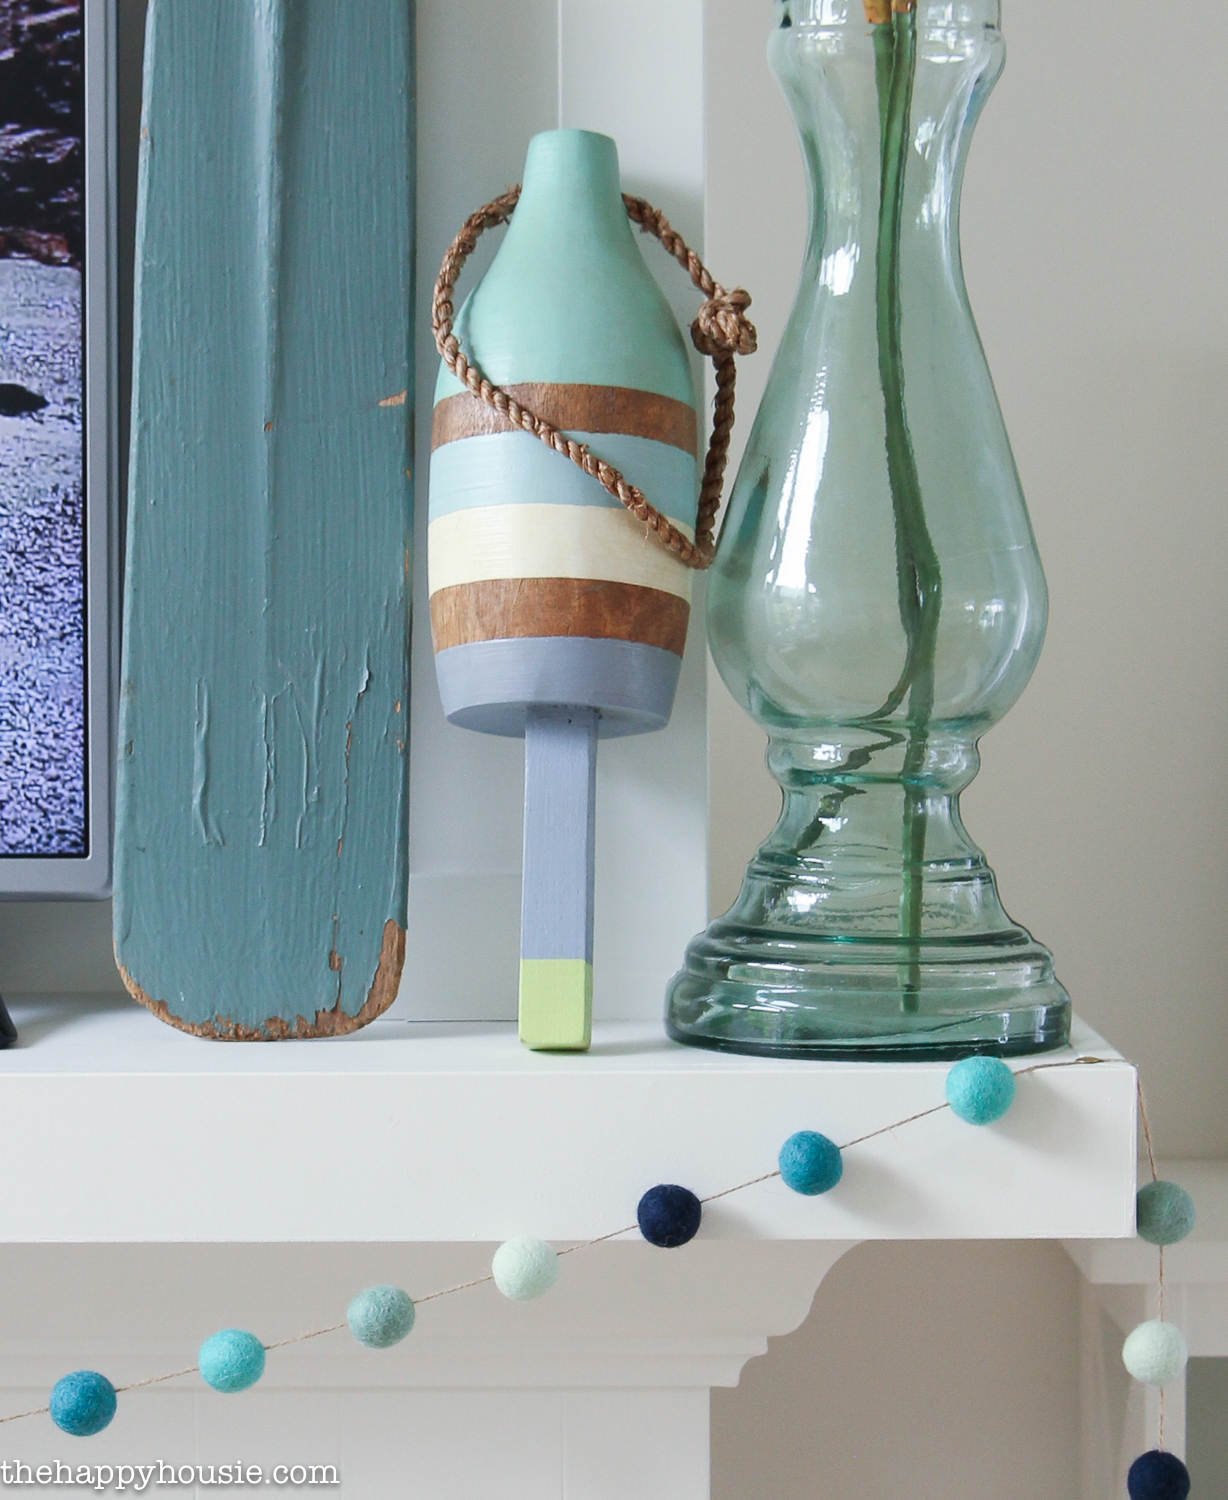 Nautical inspired items is on the mantel.